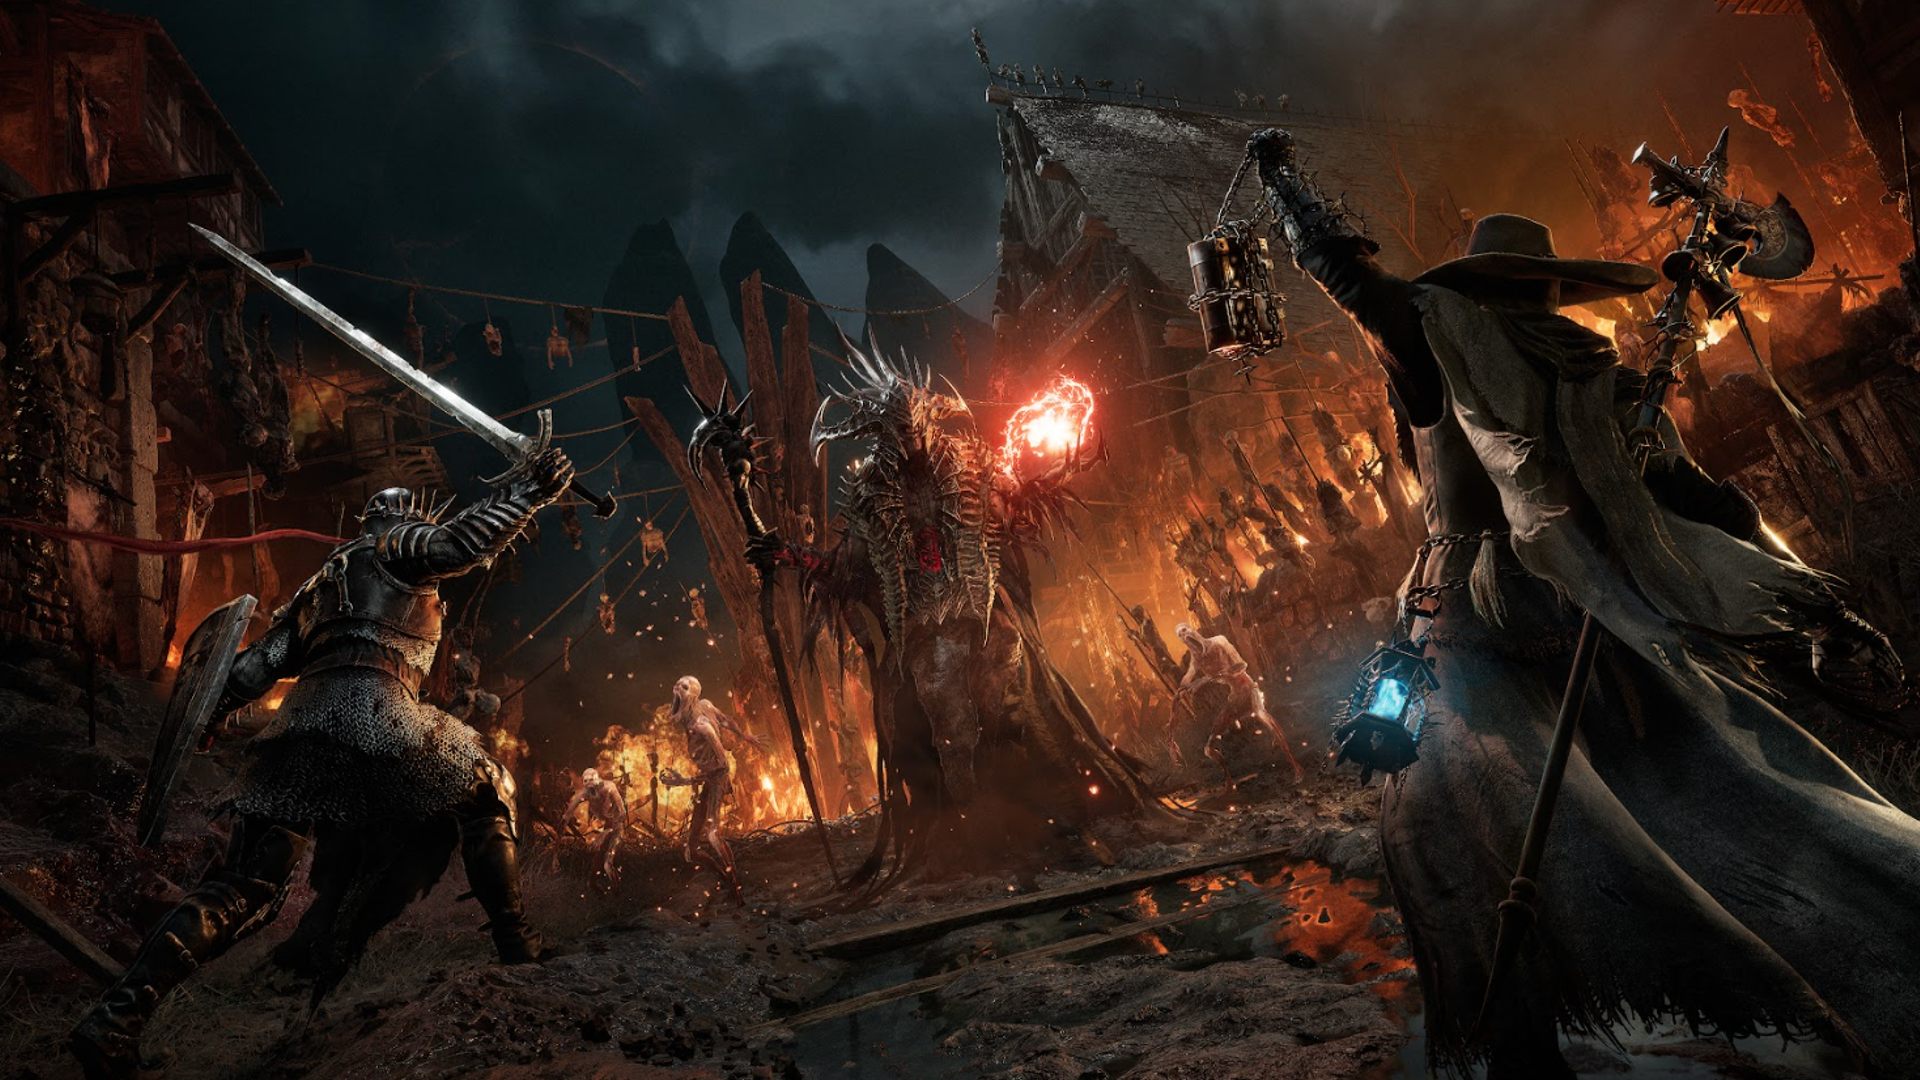 Lords of the Fallen Multiplayer: Two players can be seen fighting an enemy